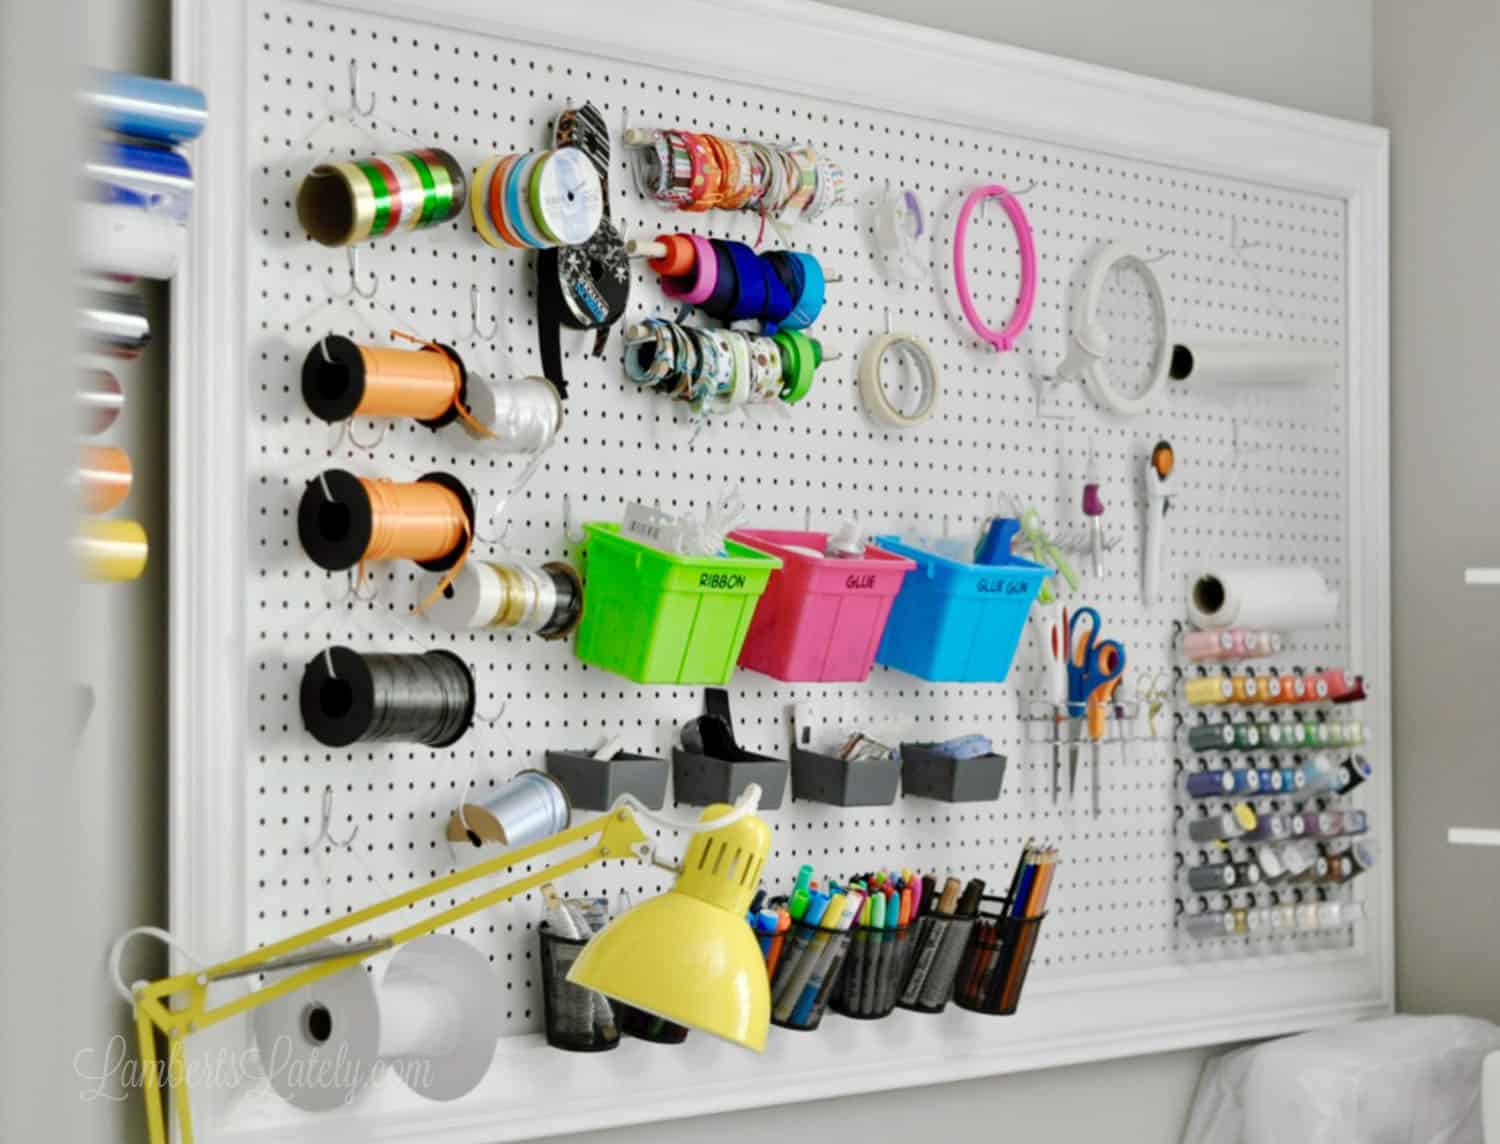 white pegboard filled with colorful crafting supplies.